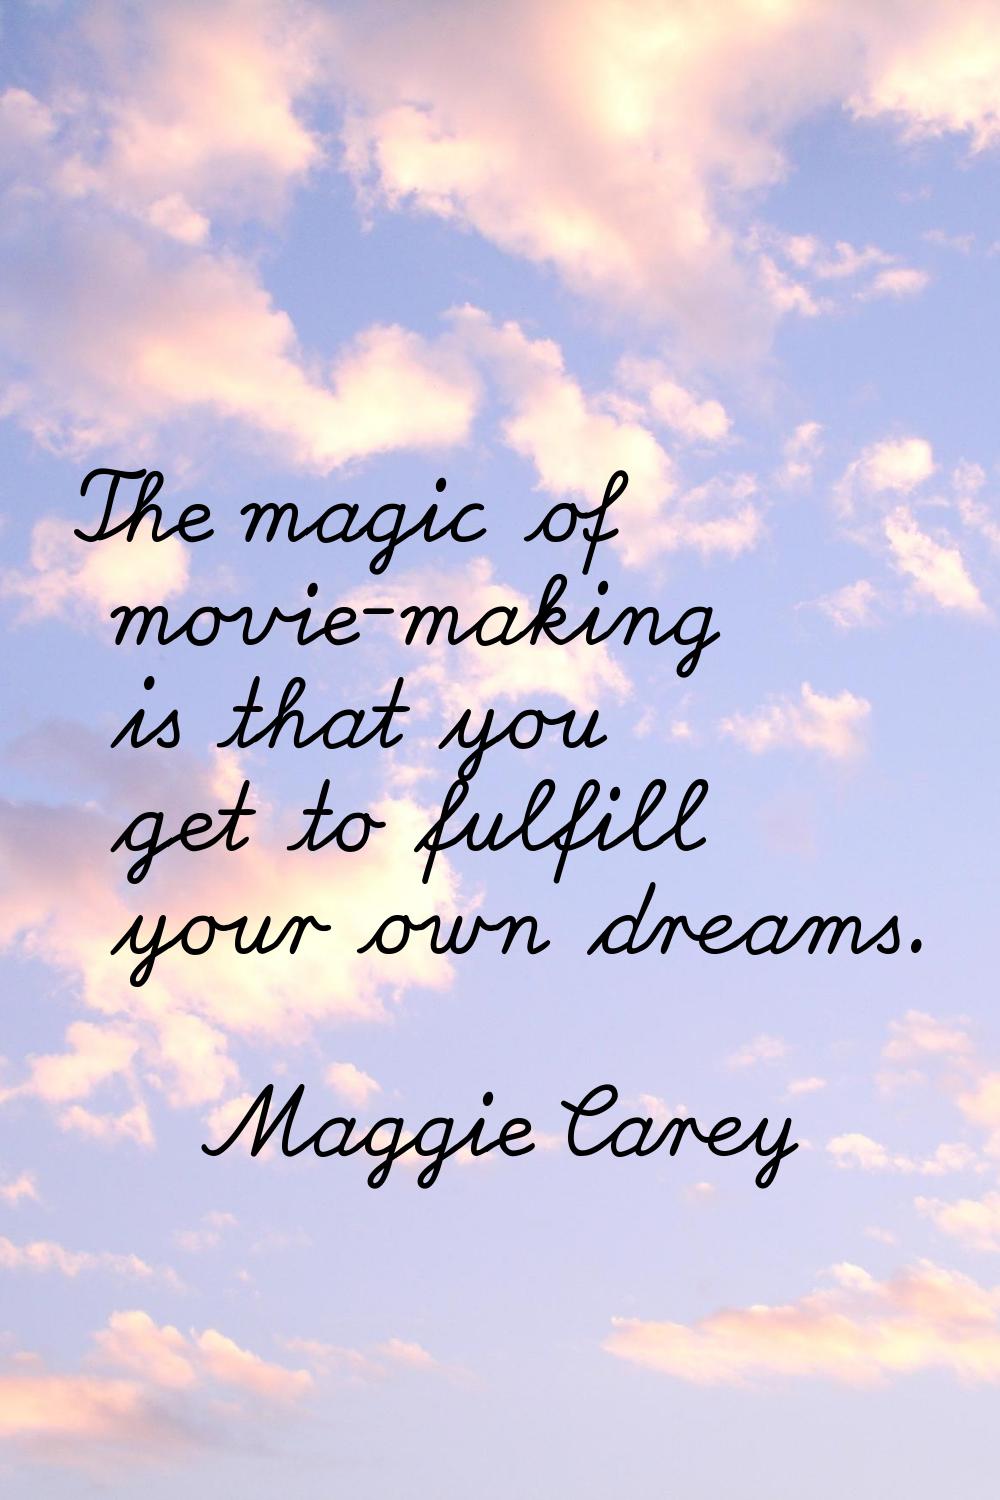 The magic of movie-making is that you get to fulfill your own dreams.